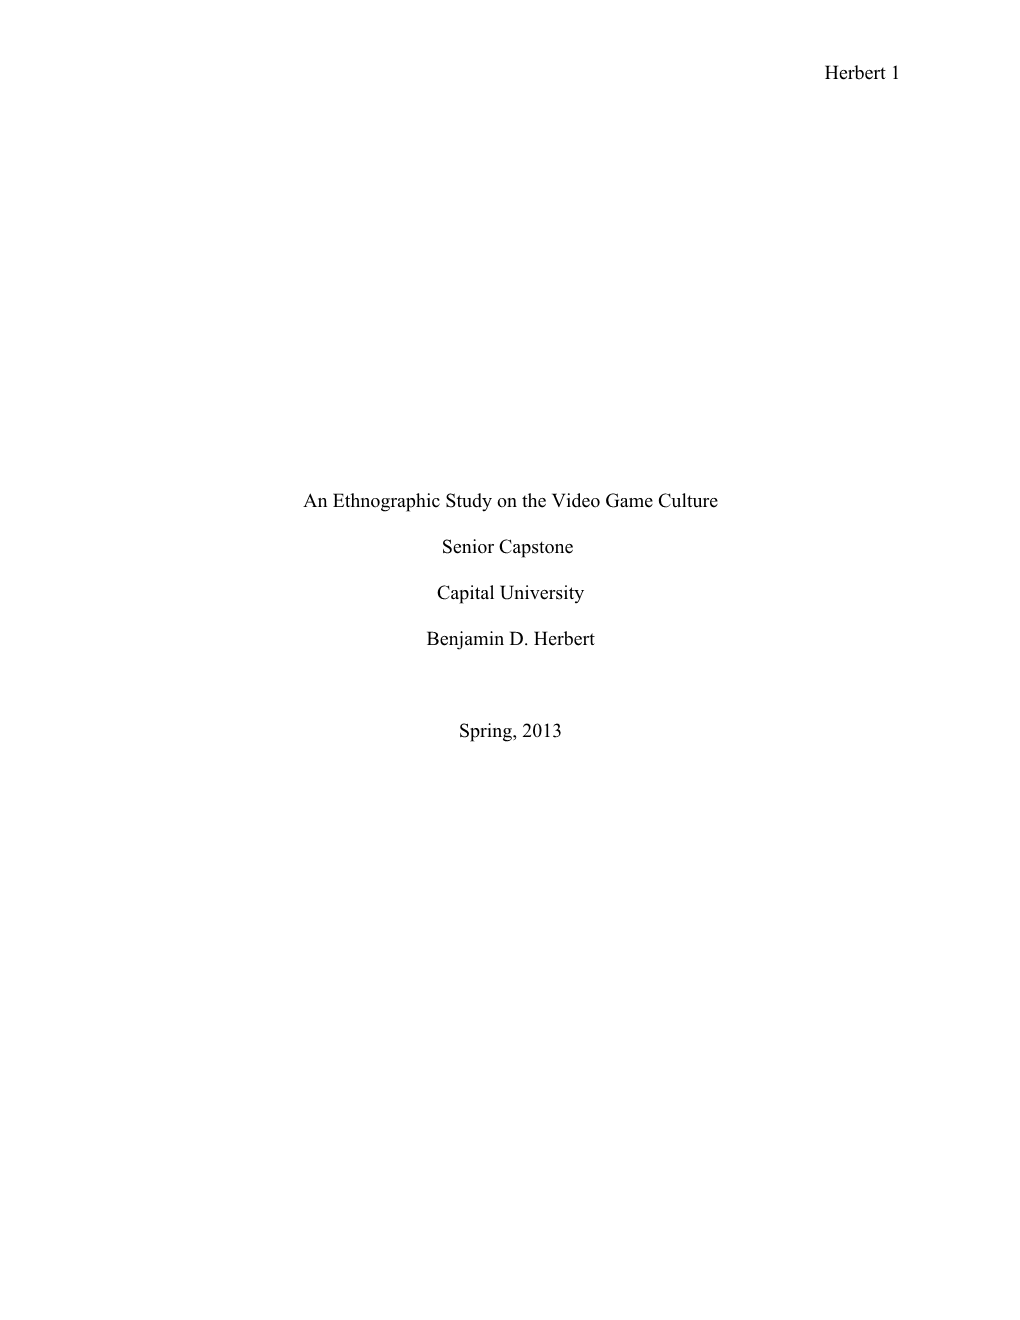 Herbert 1 an Ethnographic Study on the Video Game Culture Senior